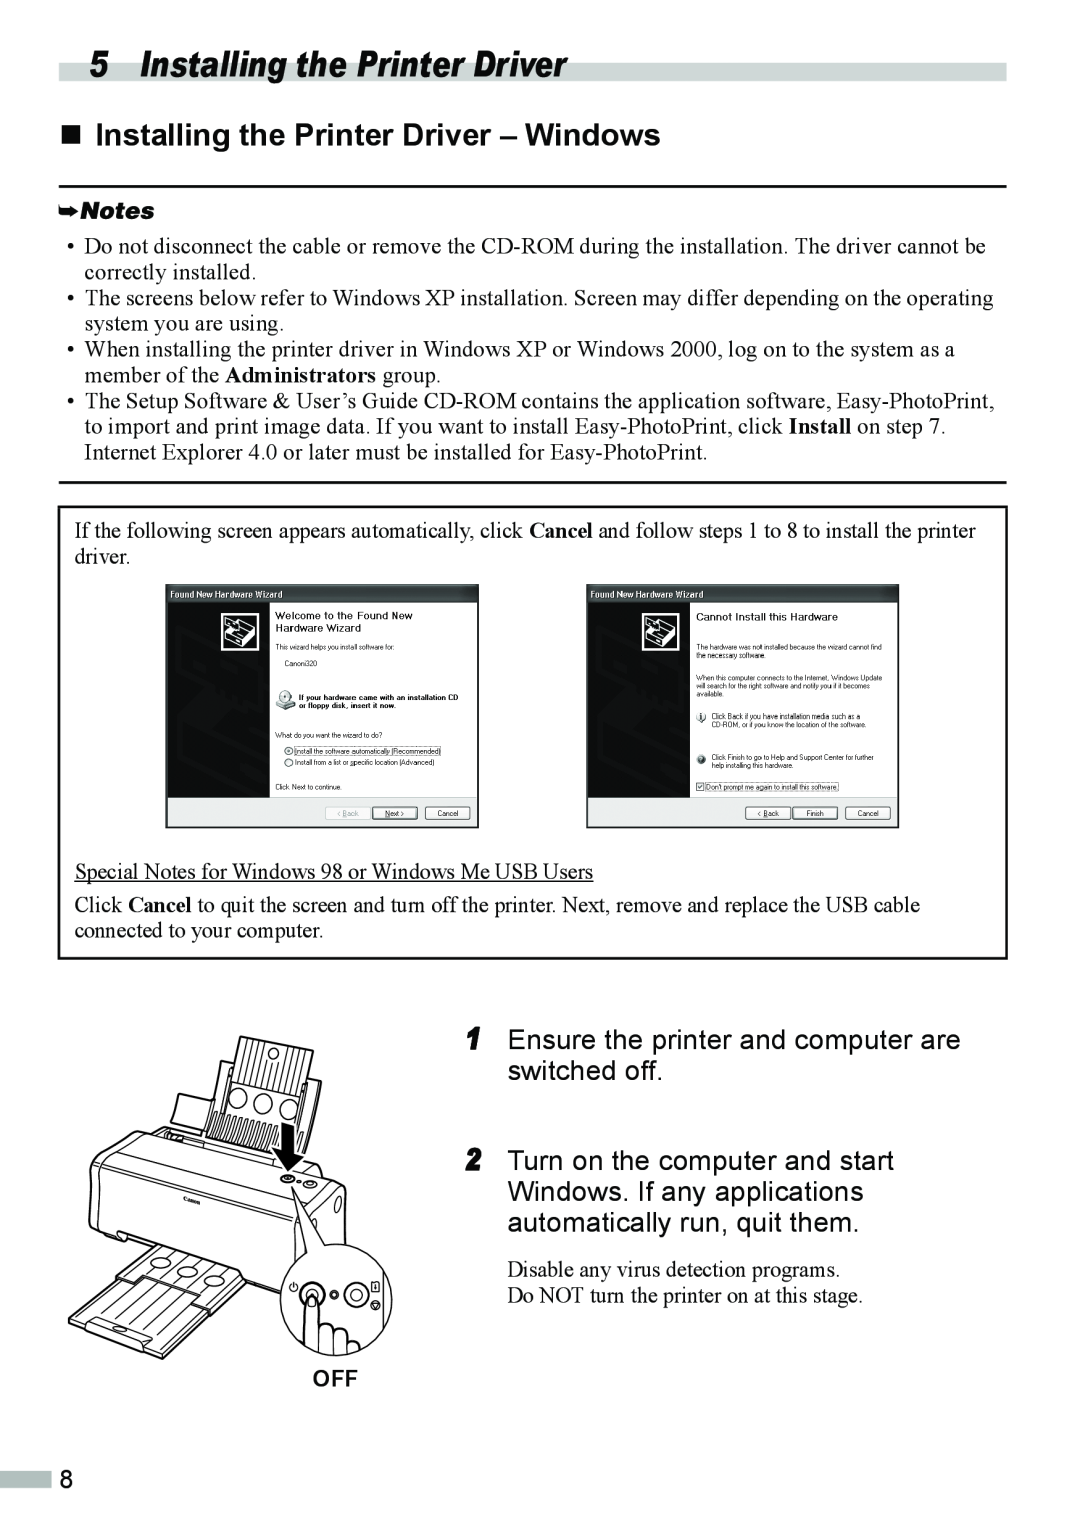 Canon 320 quick start „ Installing the Printer Driver - Windows, Ensure the printer and computer are switched off 